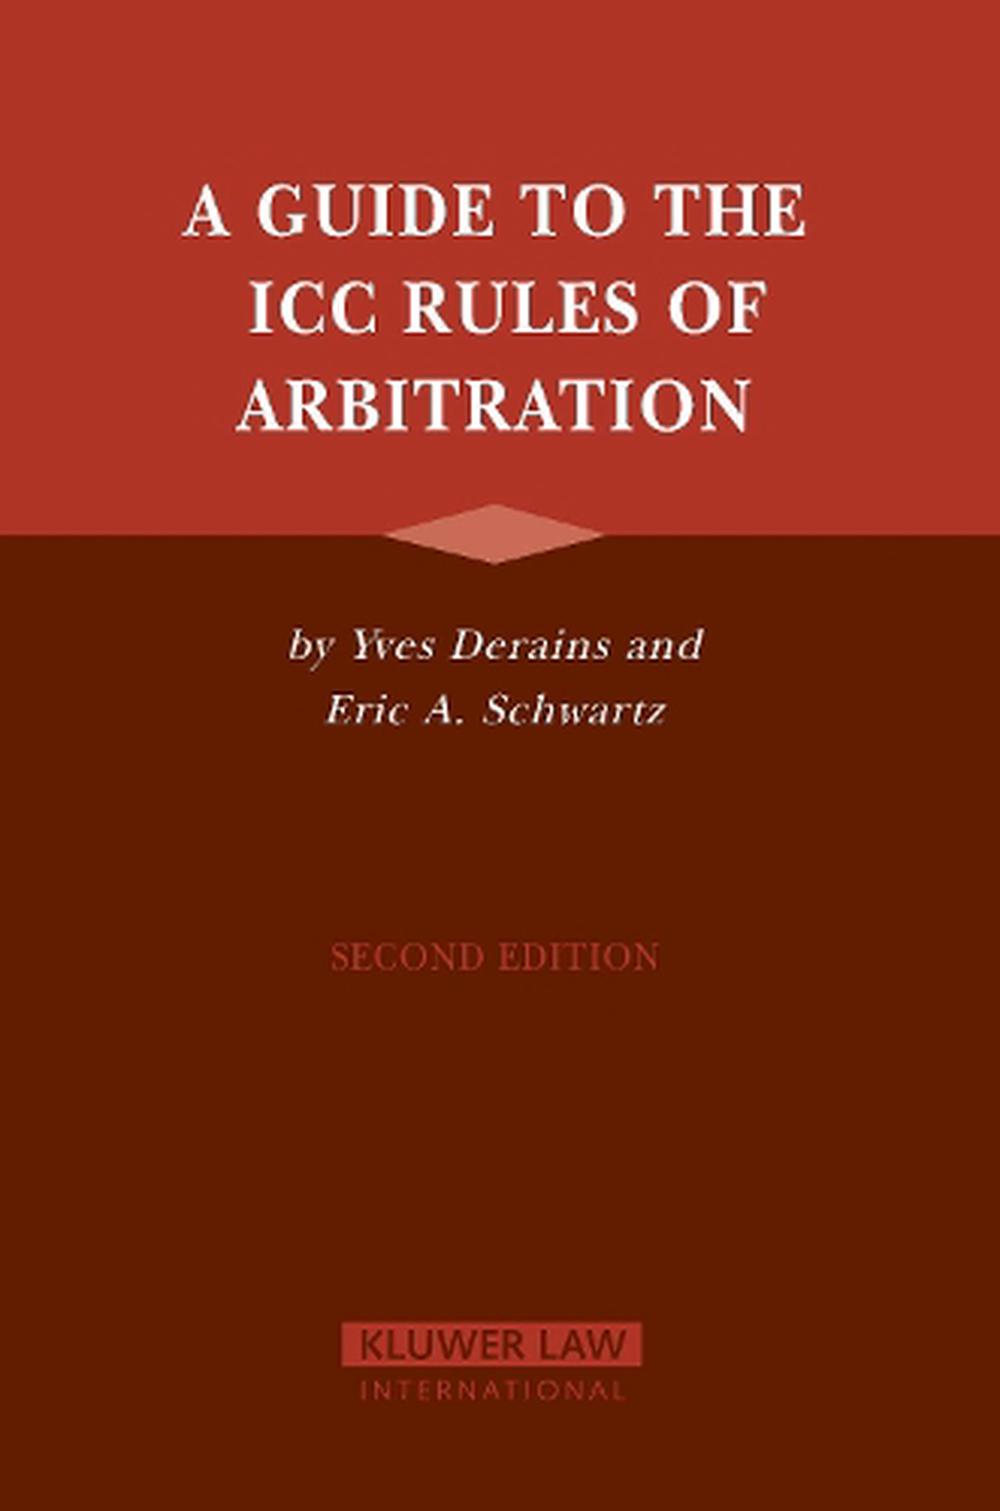 A Guide to the ICC Rules of Arbitration by Yves Derains (English